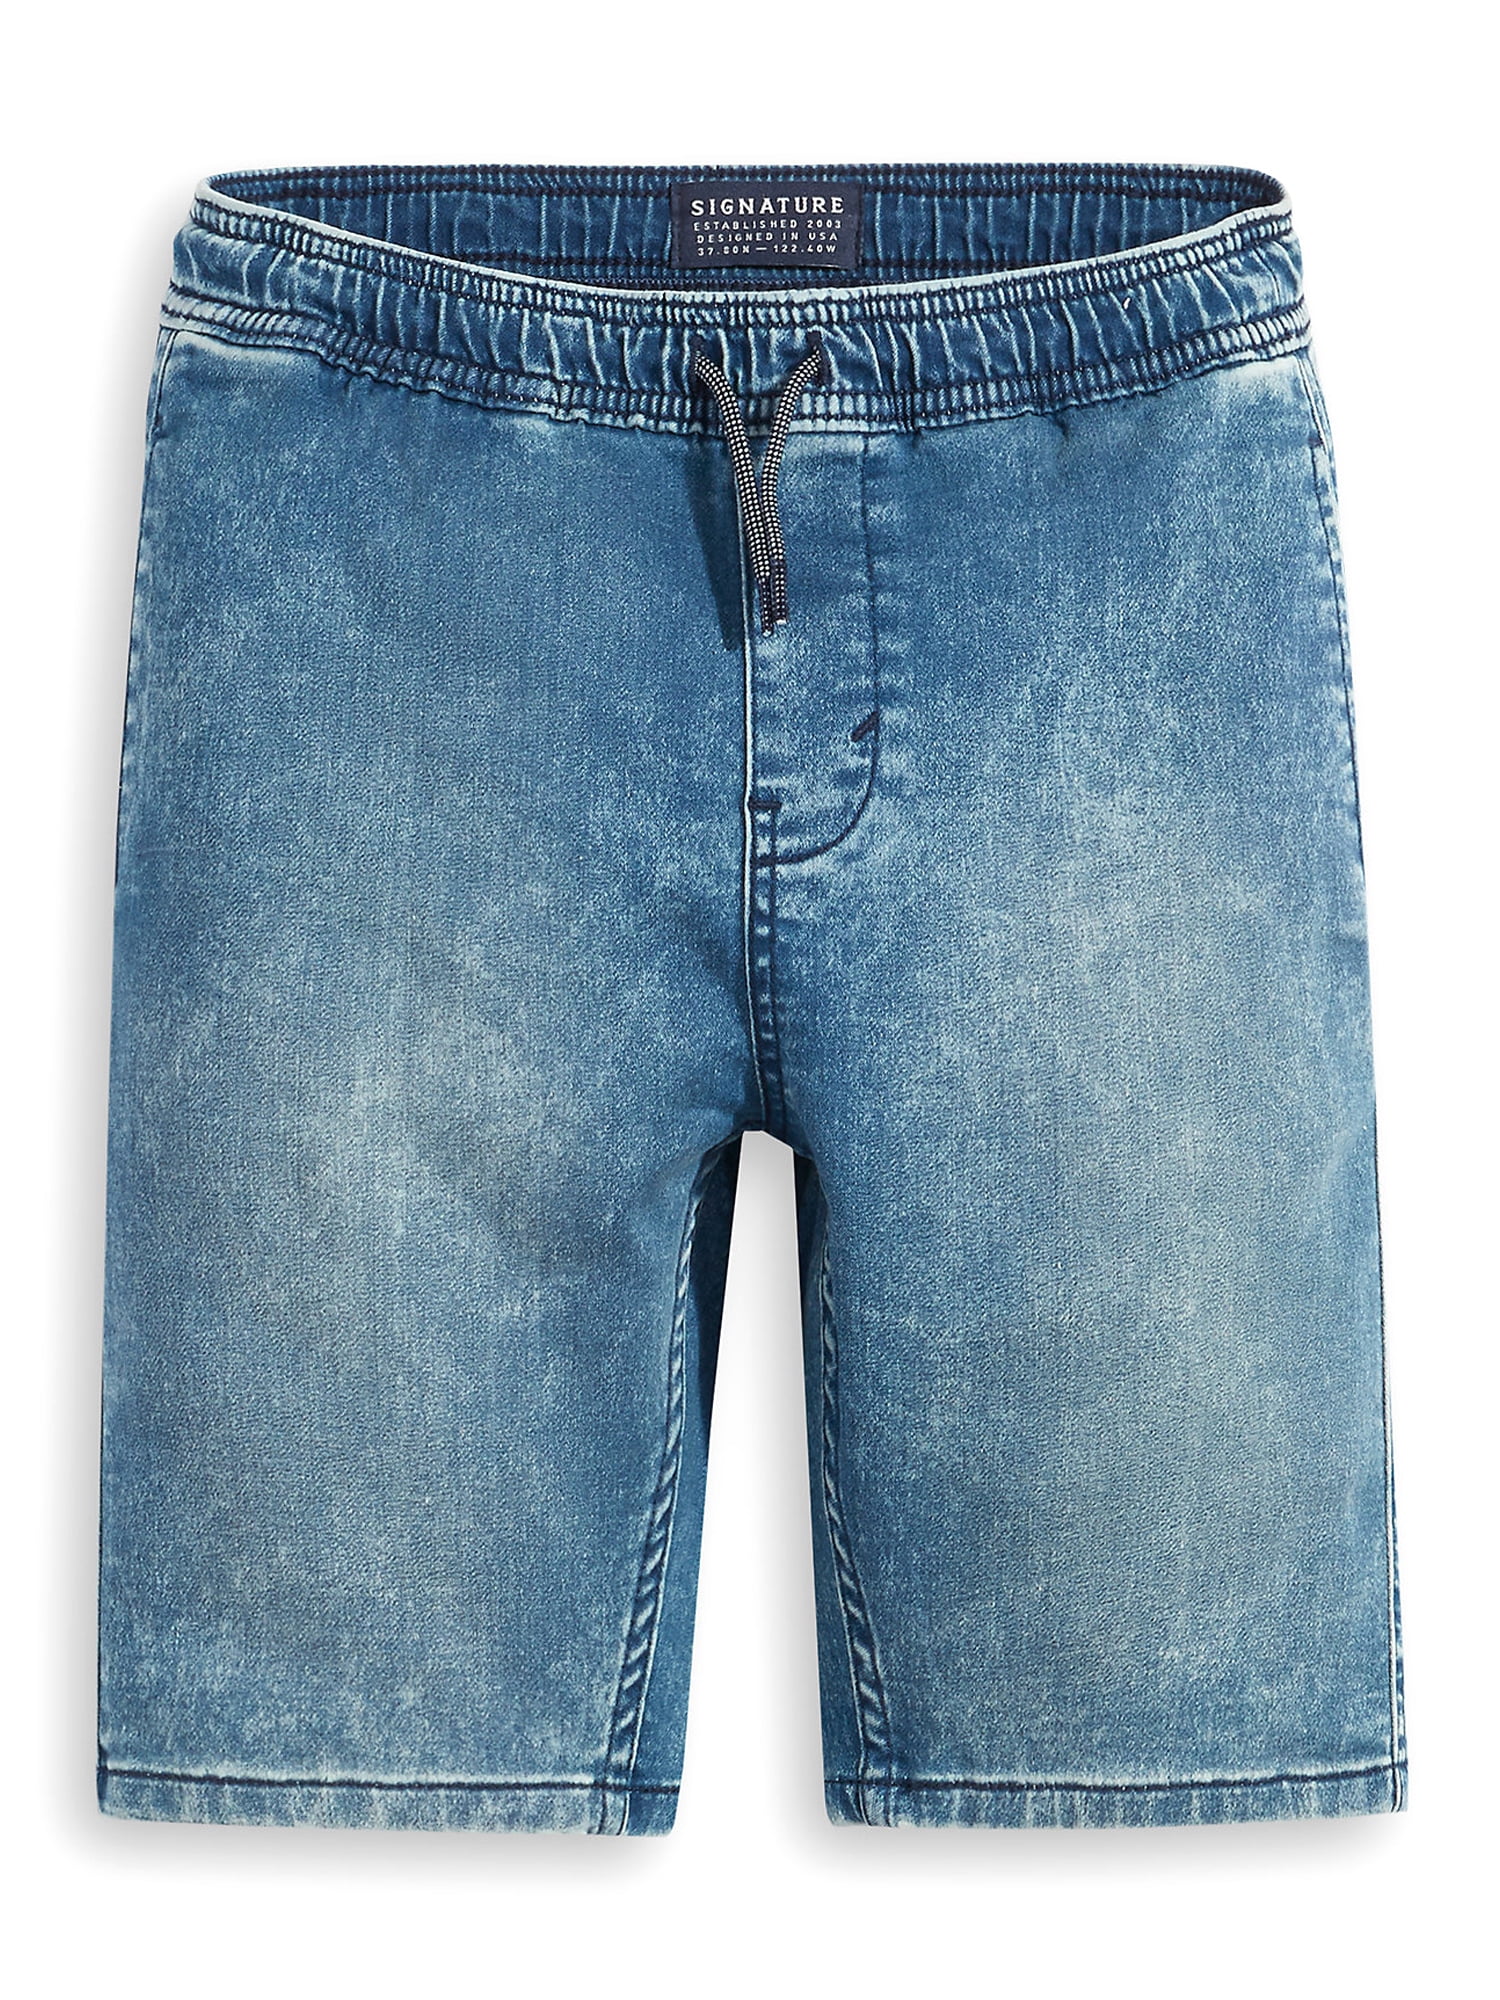 Signature By Levi Strauss & Co. Boys Pull-On Shorts, Sizes 4-18 ...